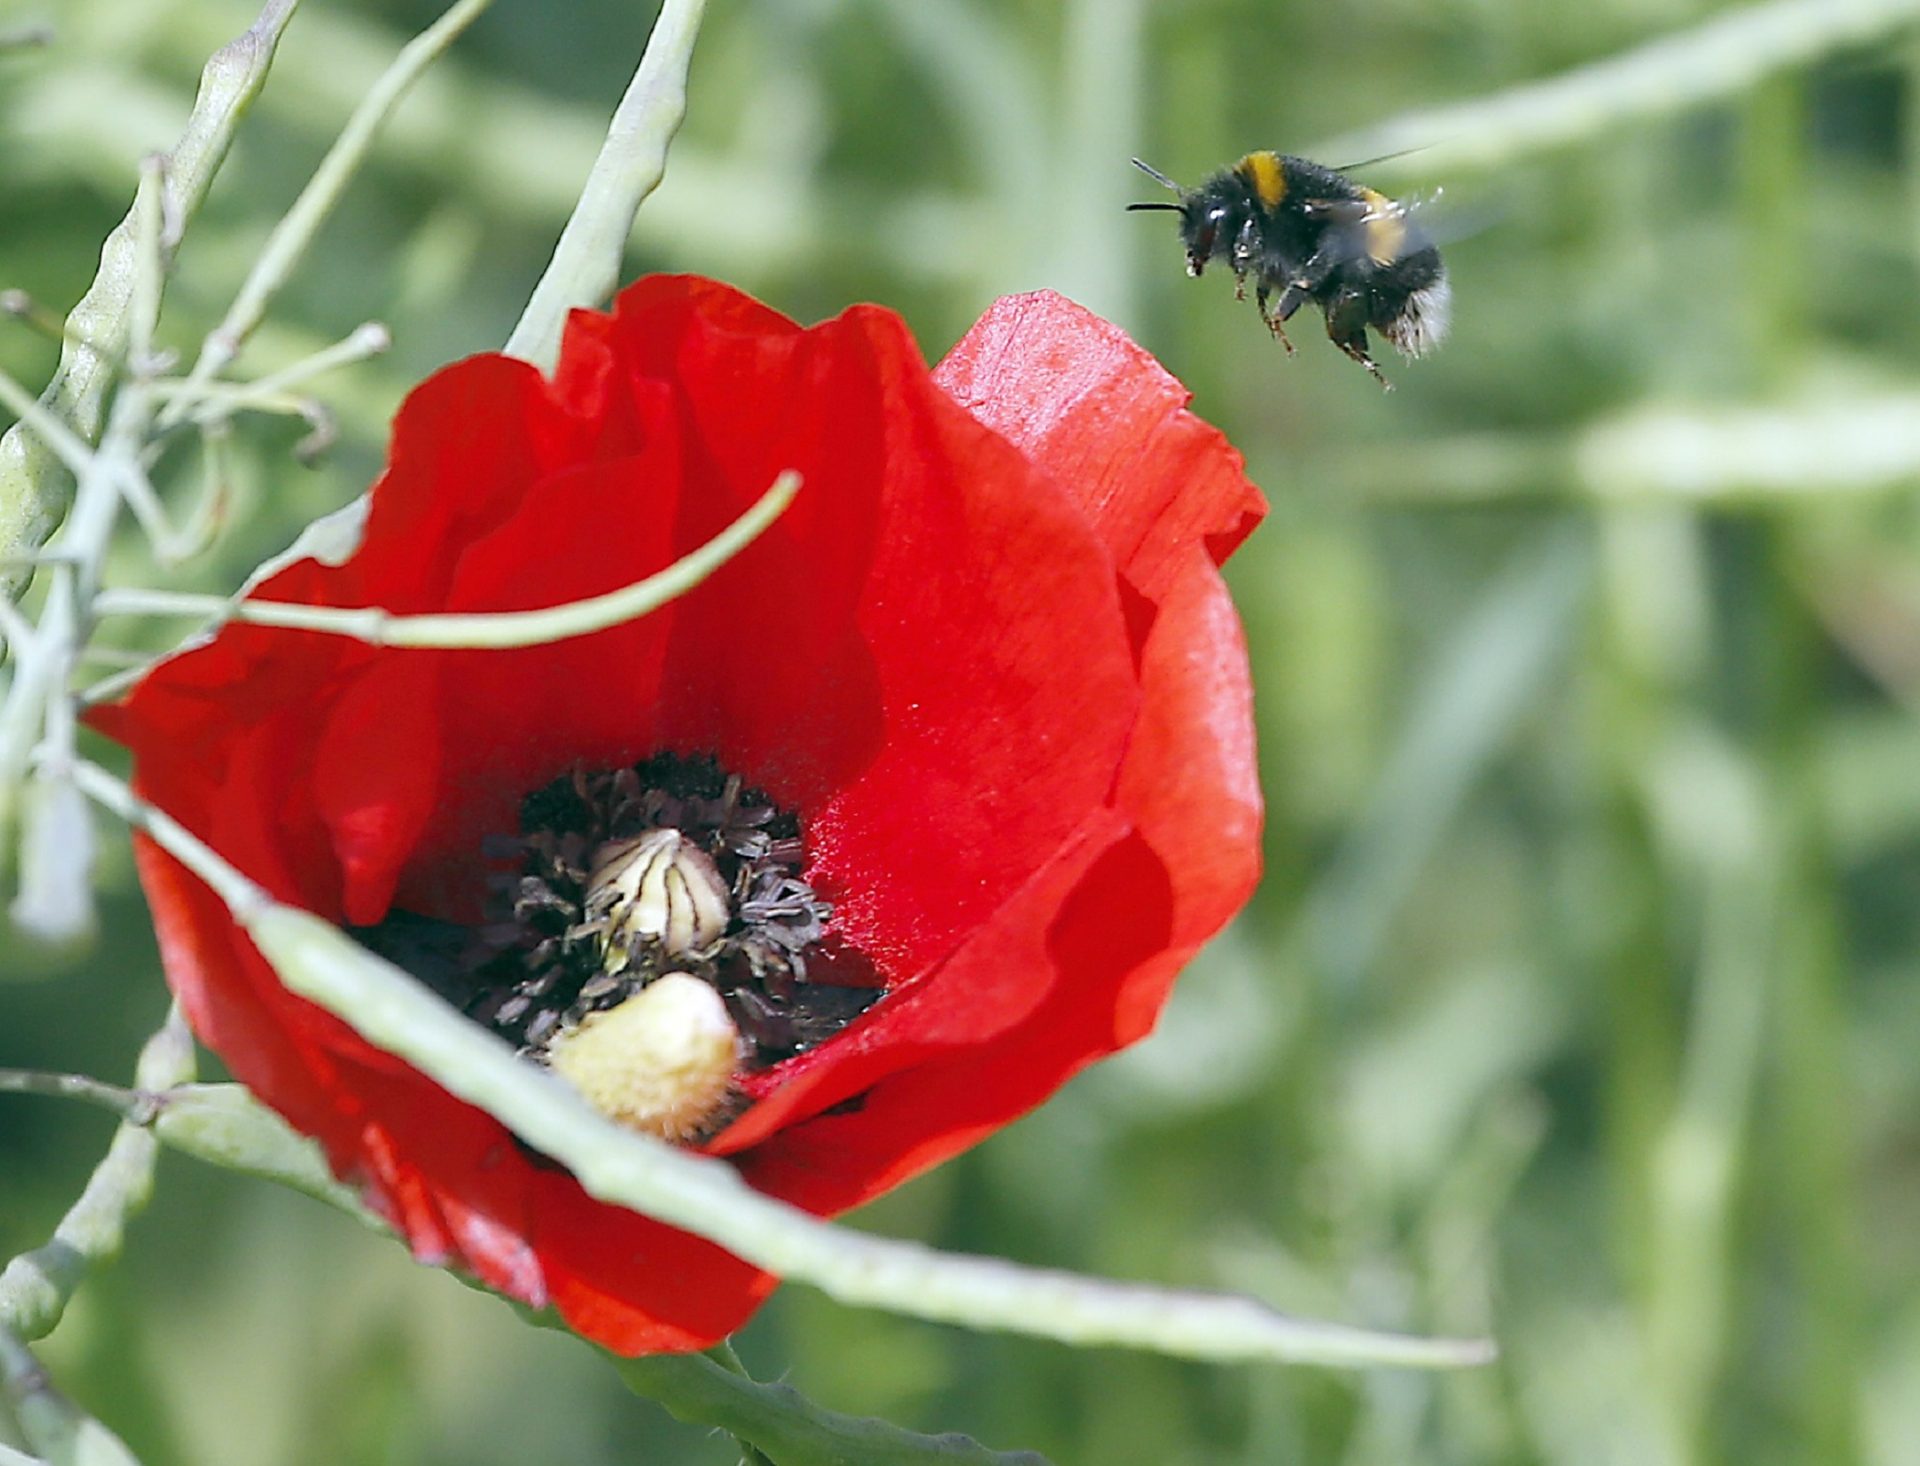 A bumblebee approaches landing on a poppy flower in a field in Duisburg, Germany, Wednesday, May 14, 2014. Weather forecast in Germany predicts more sun and warmer temperatures for the upcoming weekend.